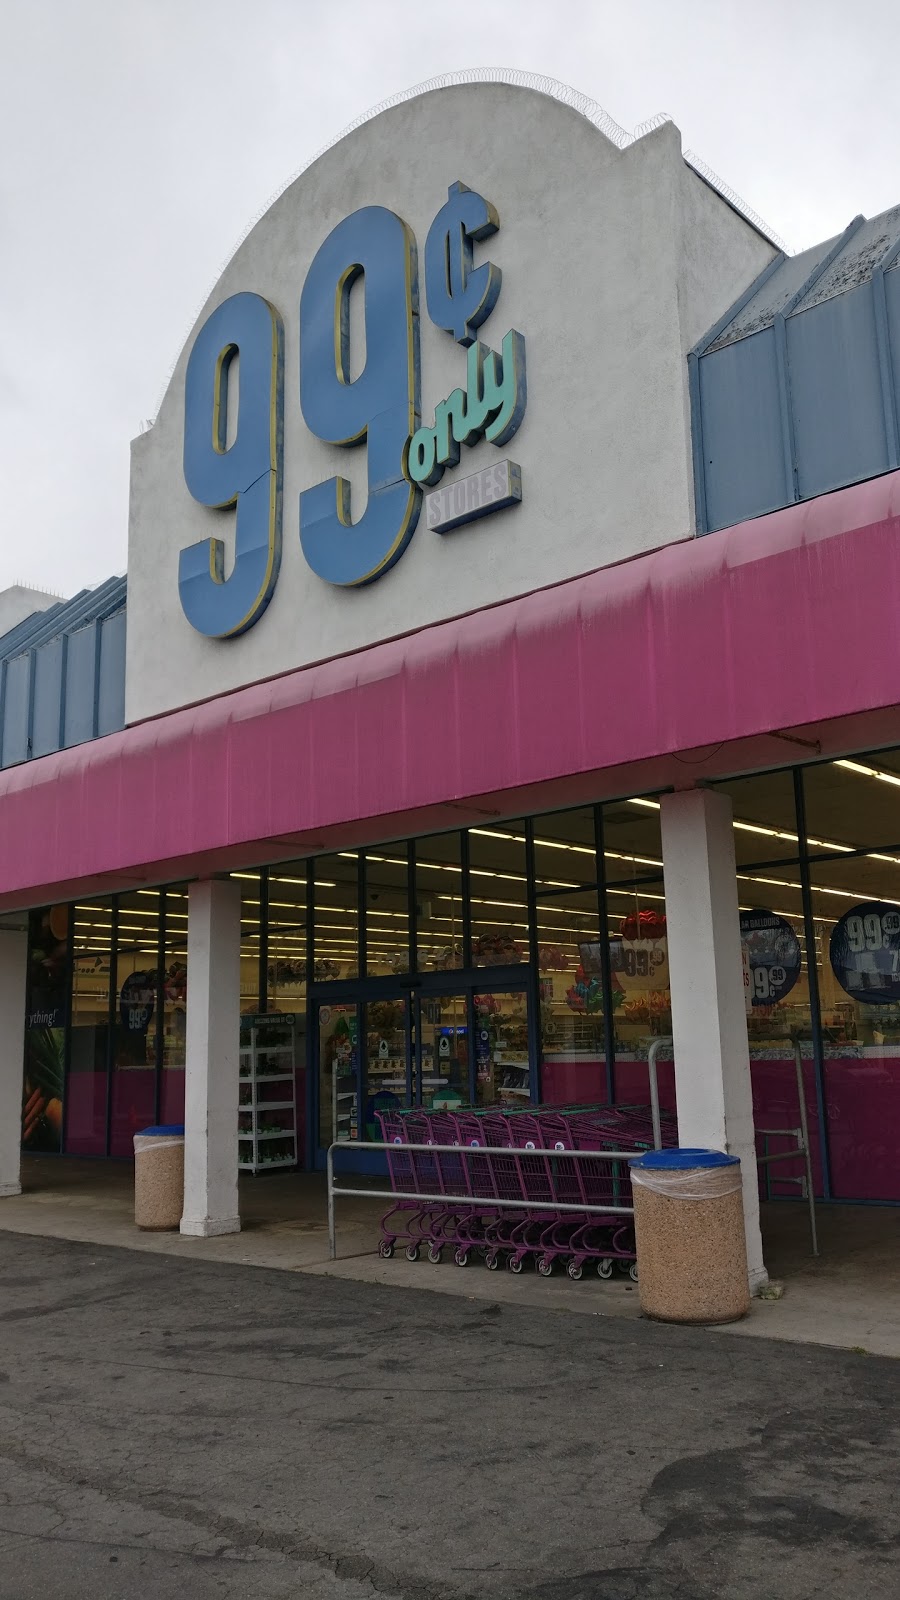 99 Cents Only Stores | 15962 Springdale St, Huntington Beach, CA 92649, USA | Phone: (714) 379-0902